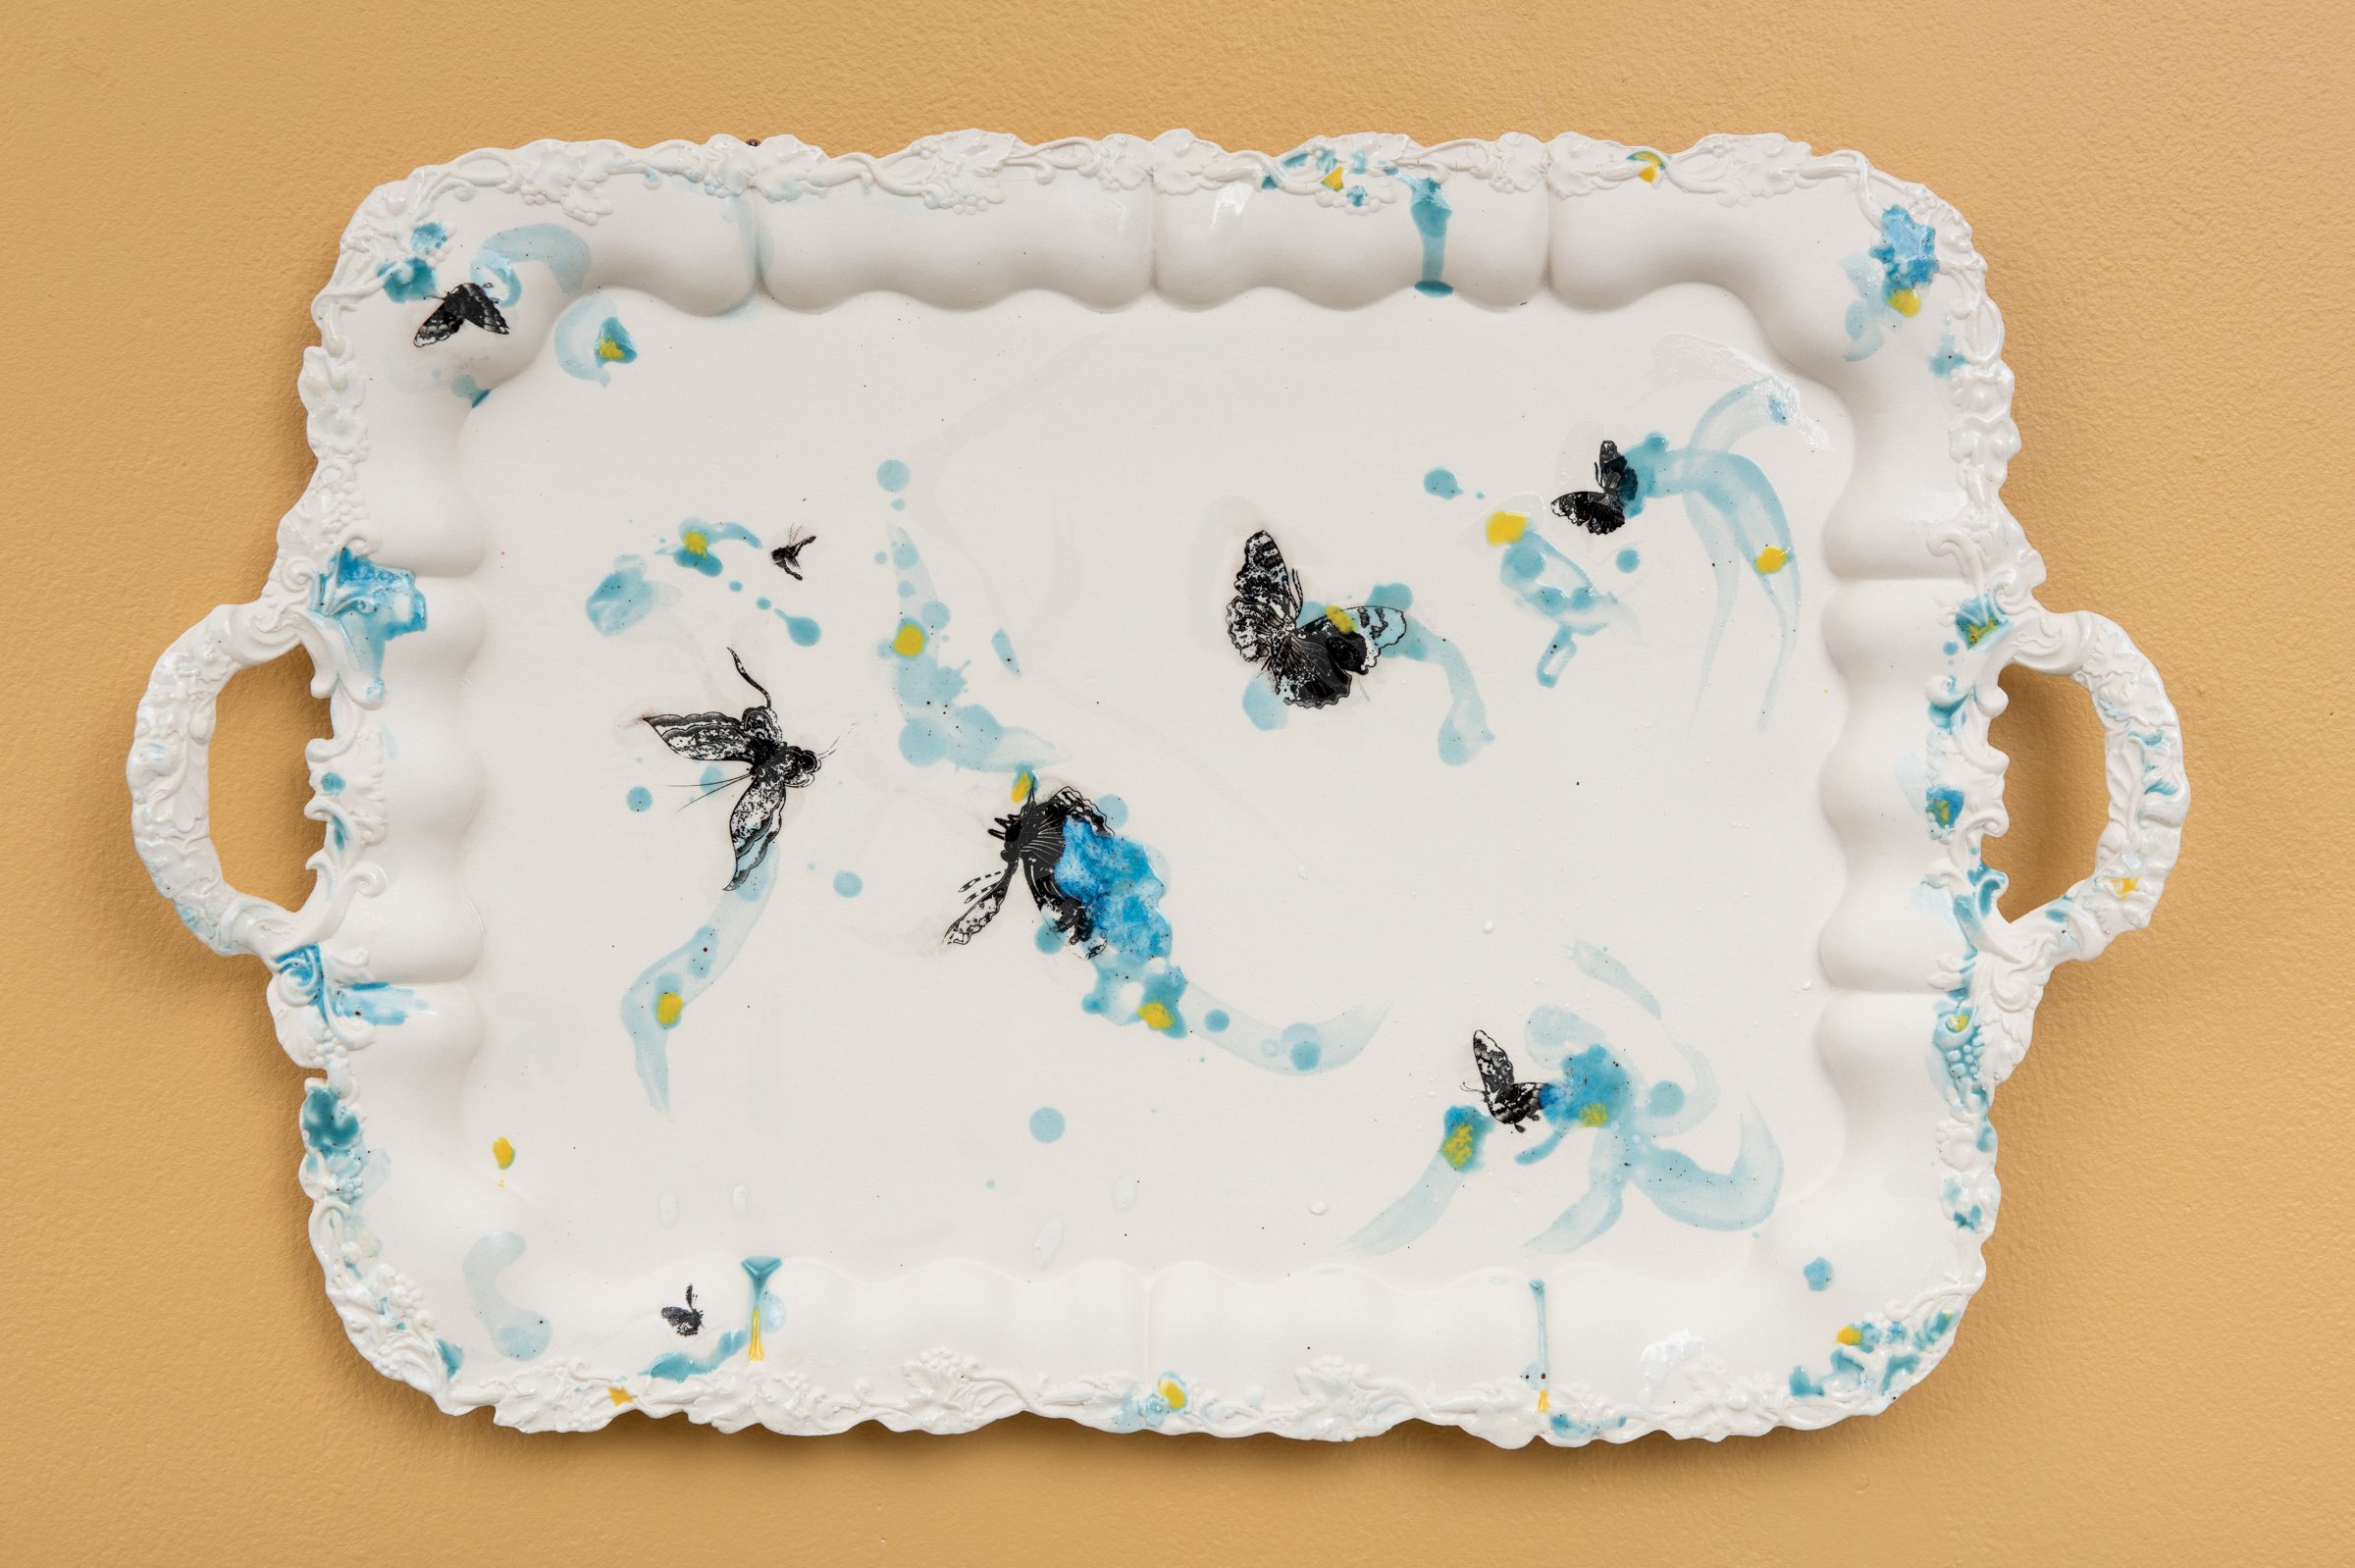  Why do Europeans put plates on their walls? IV | 2022  Porcelain, glazes, porcelain decals and tissue paper, press molding. 64x42x4cm  Photo: Thomas Tveter 